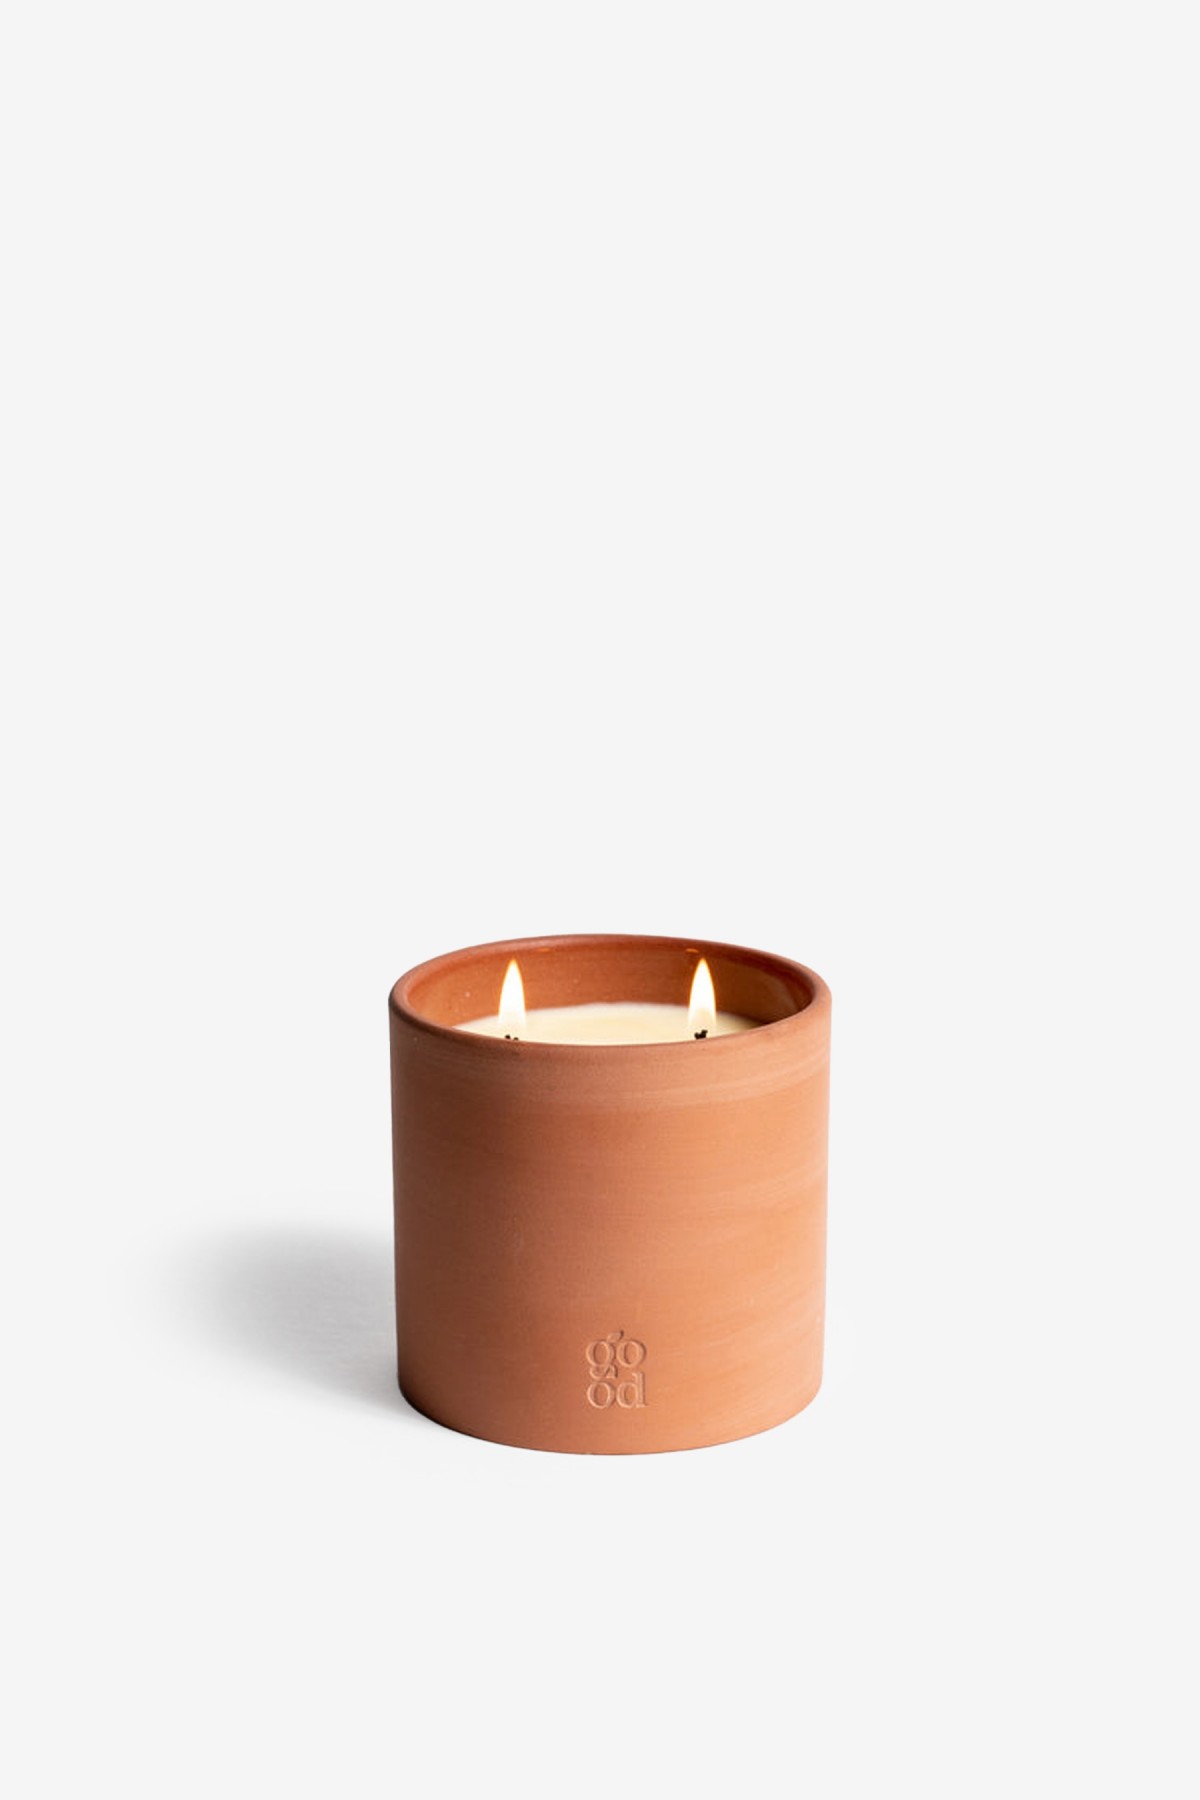 The Very Good Candle Co. Terracotta Candles 250ml/45H in Stormur